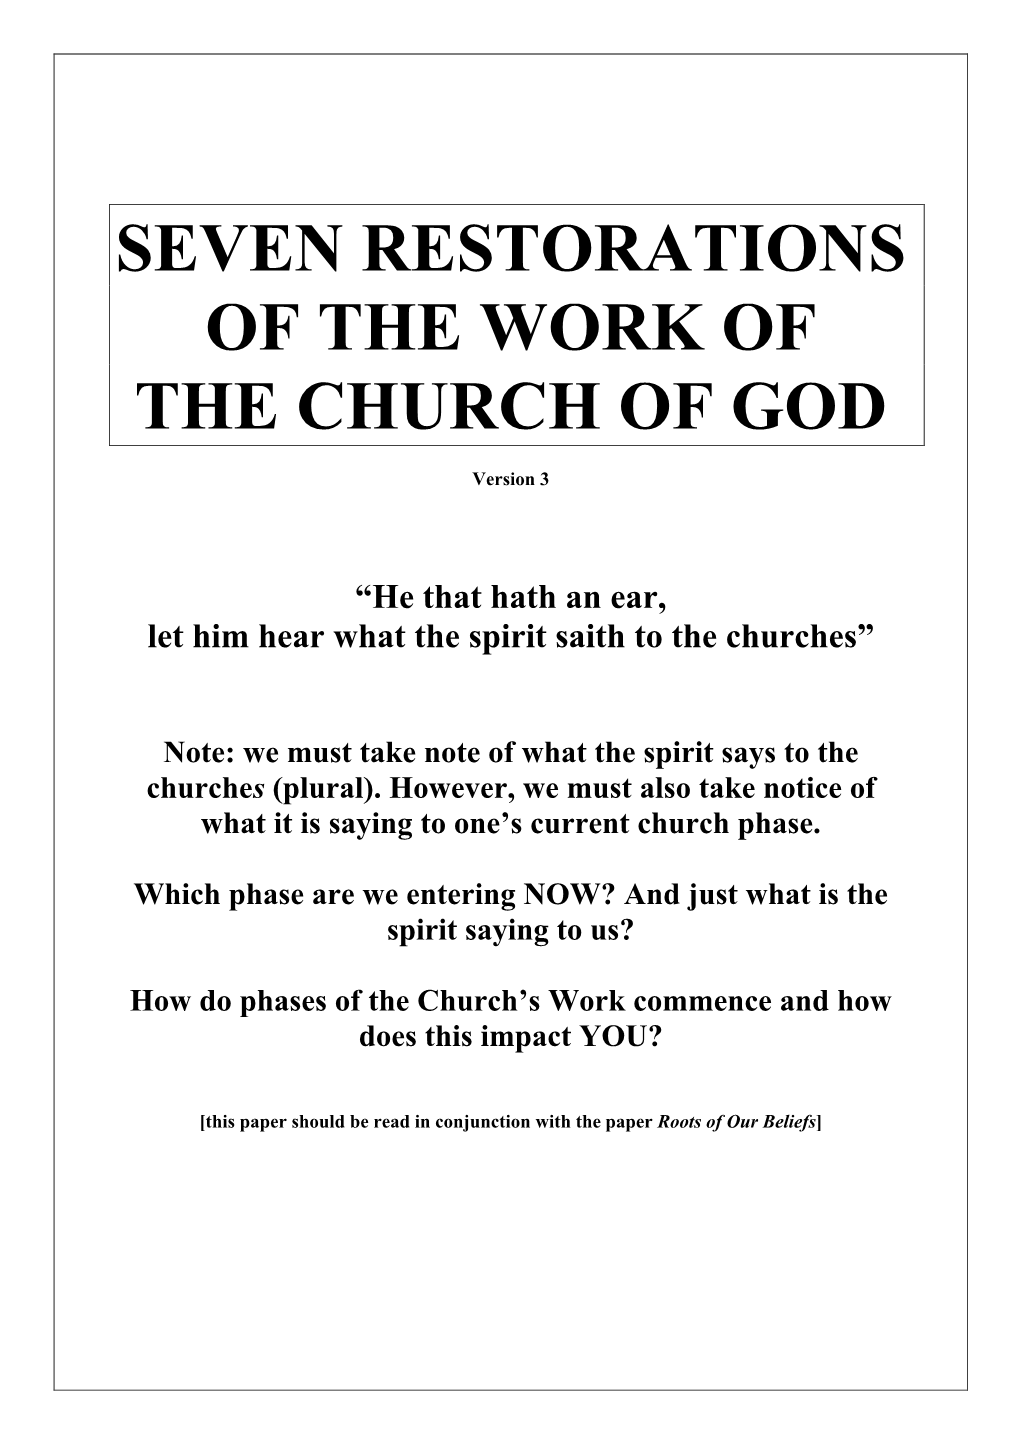 Seven Restorations of the Work of the Church of God